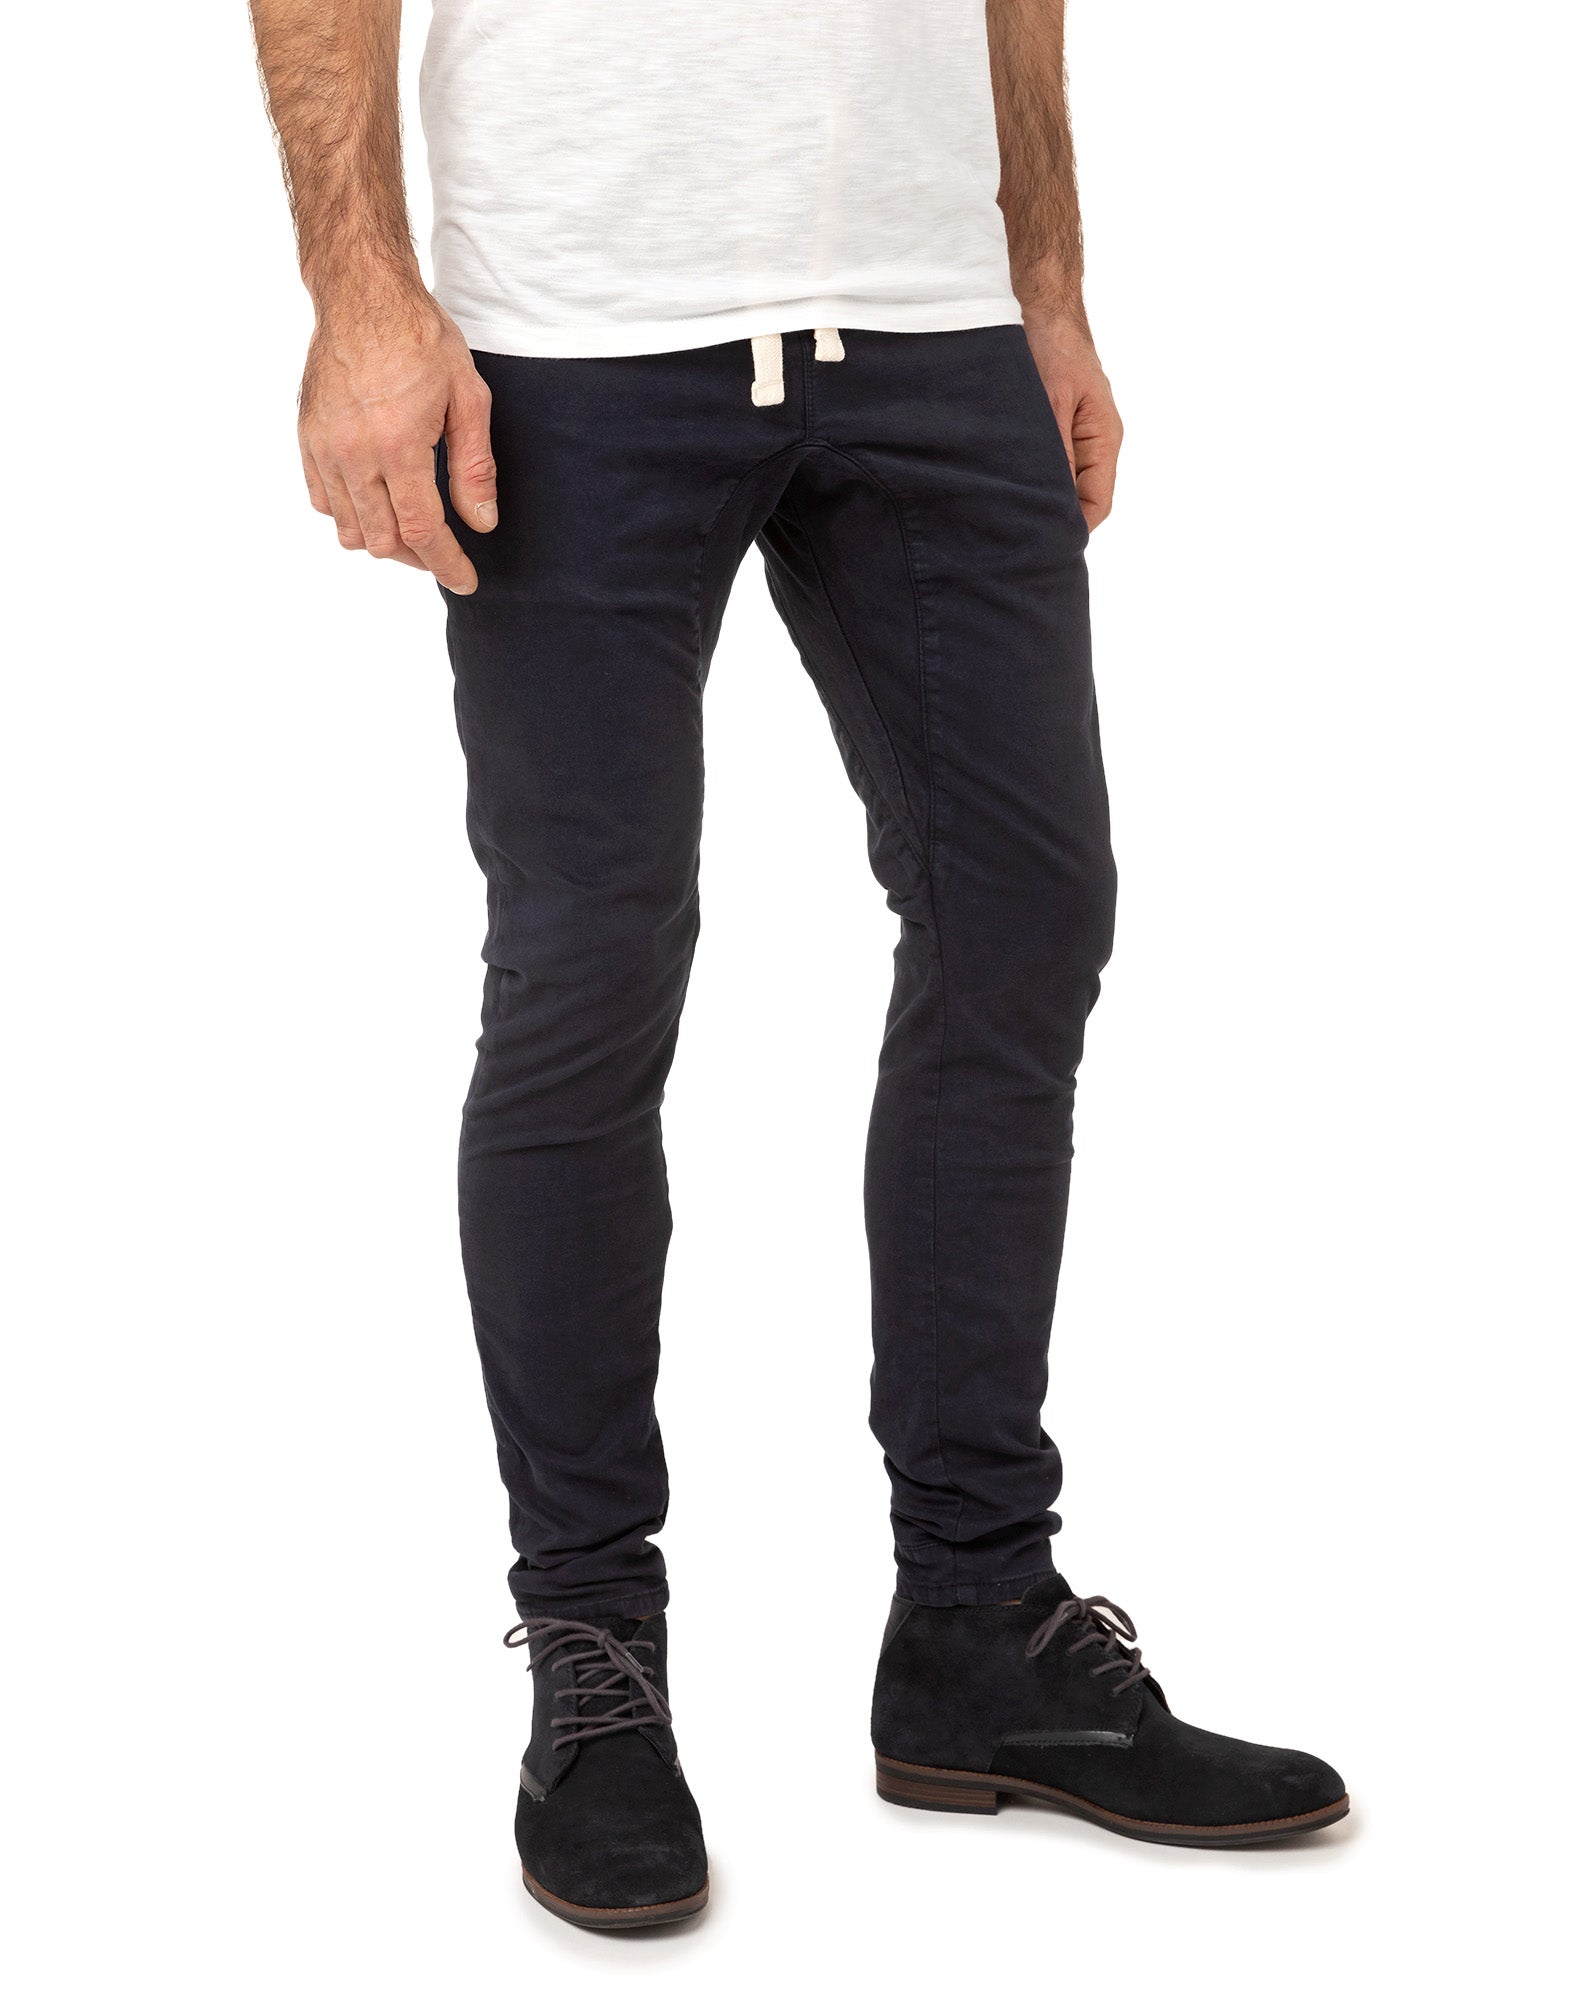 Dening epic2 tapered joggers